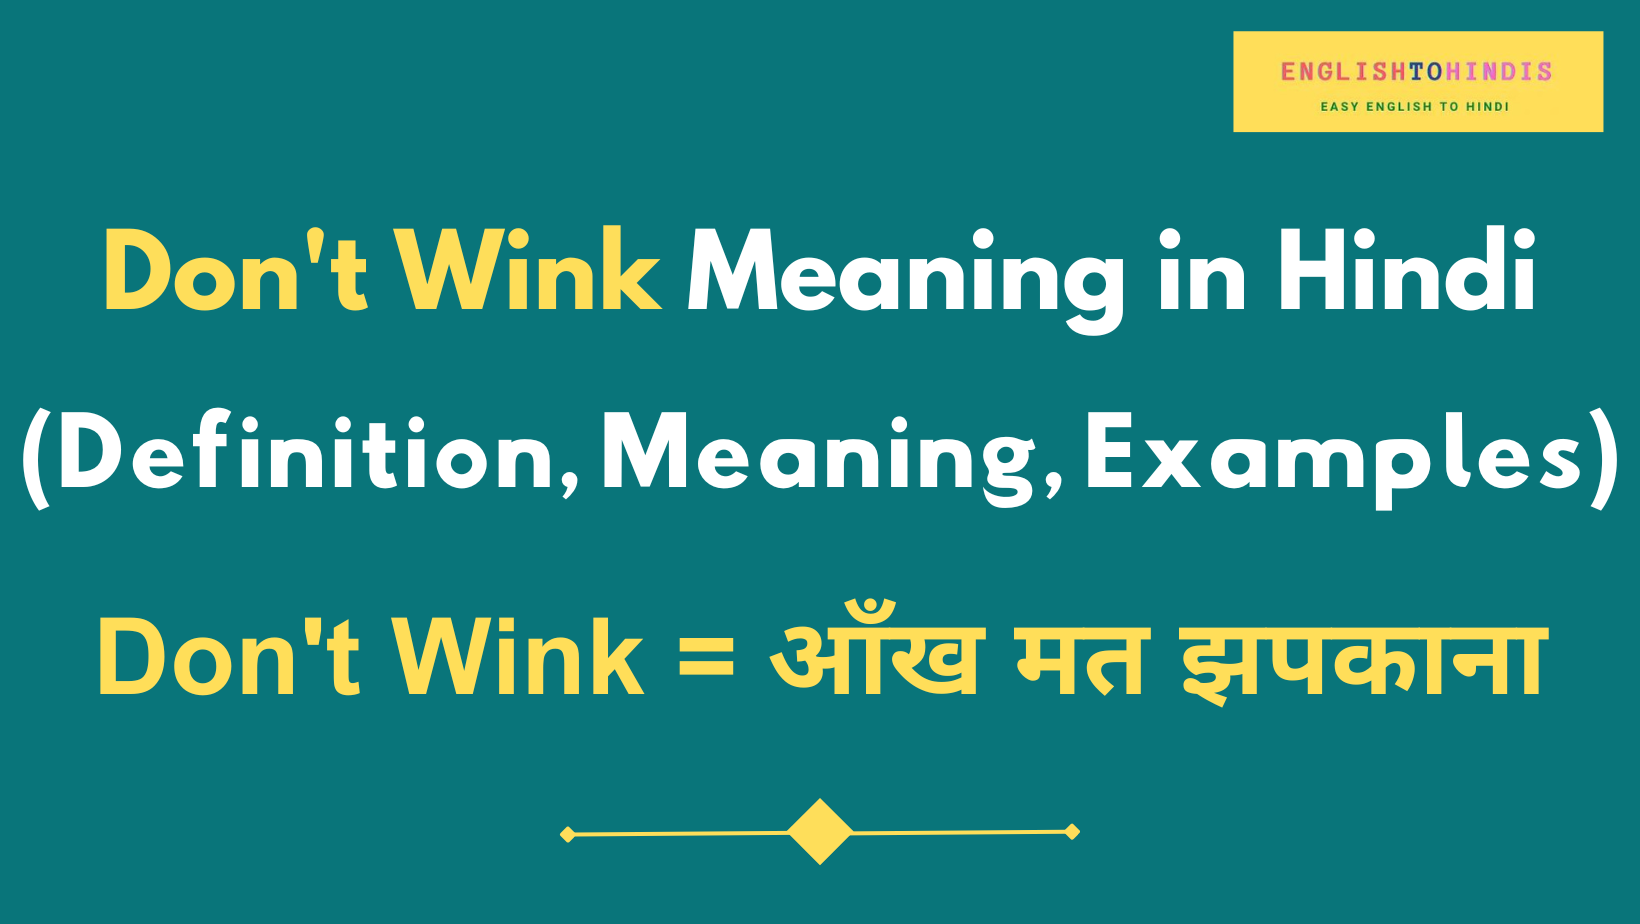 Don't Wink Meaning in Hindi